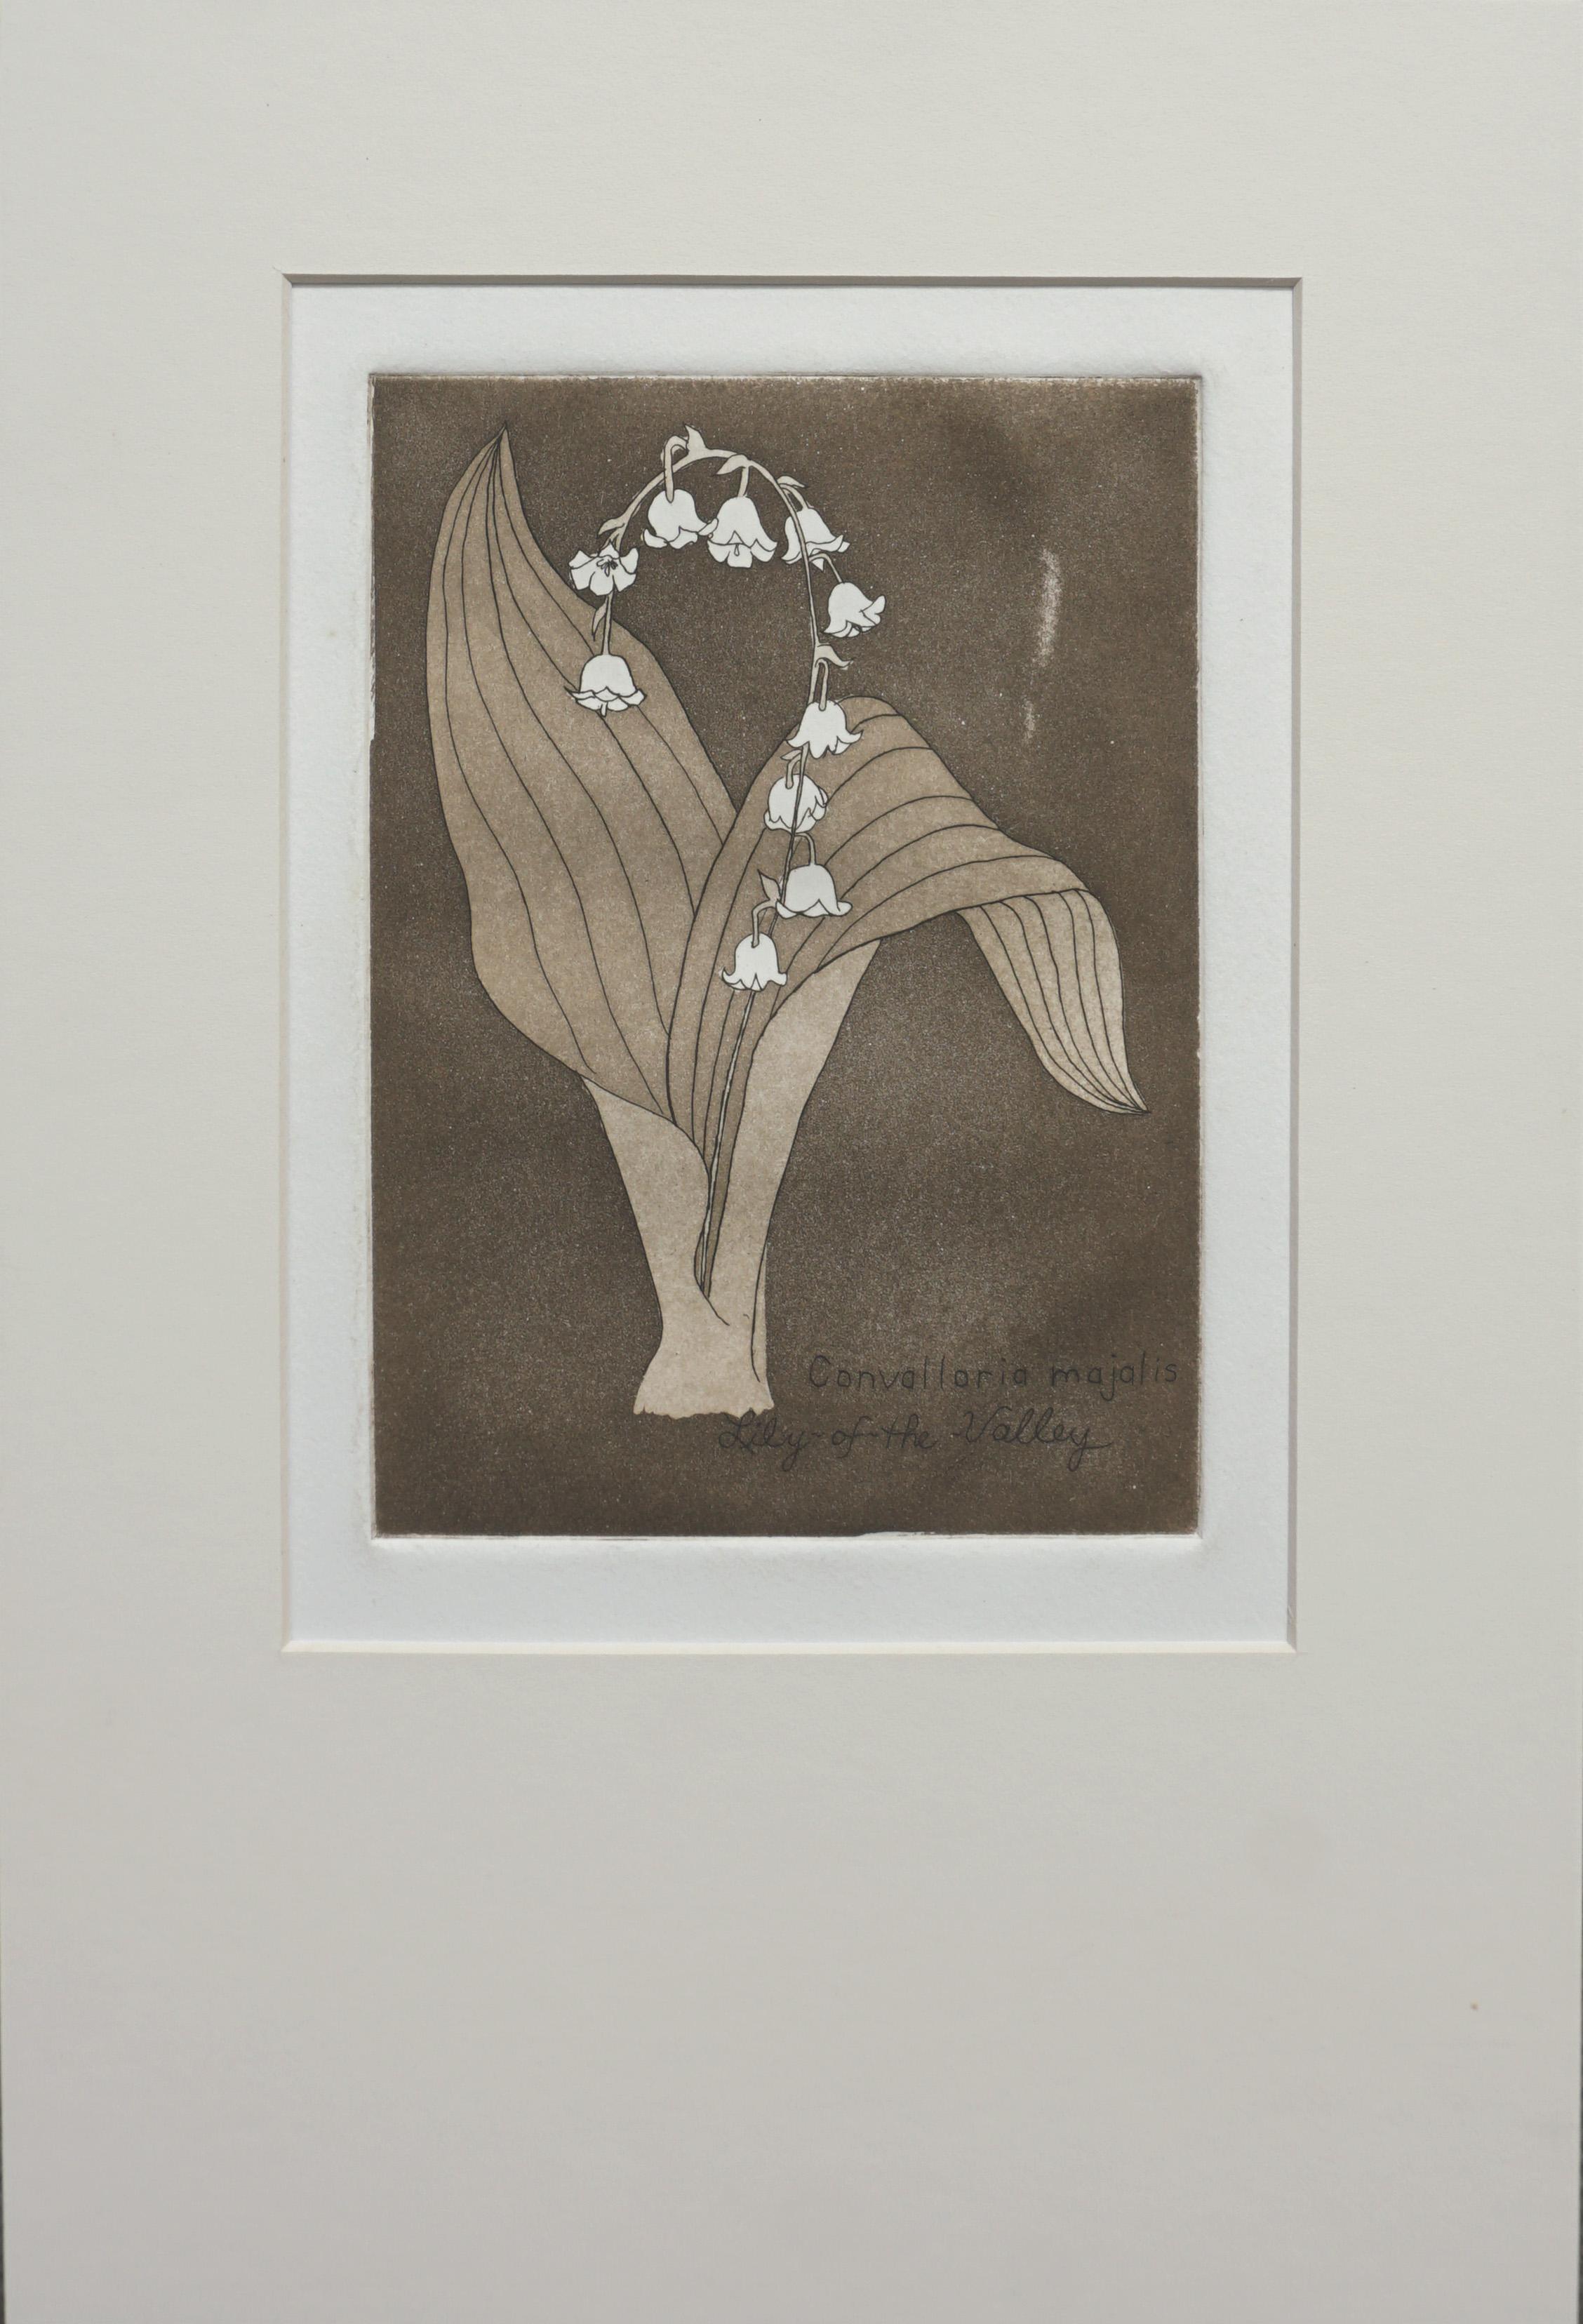 Still-Life Print Patricia A Pearce - "Lily of the Valley" - Lithographie botanique de nature morte